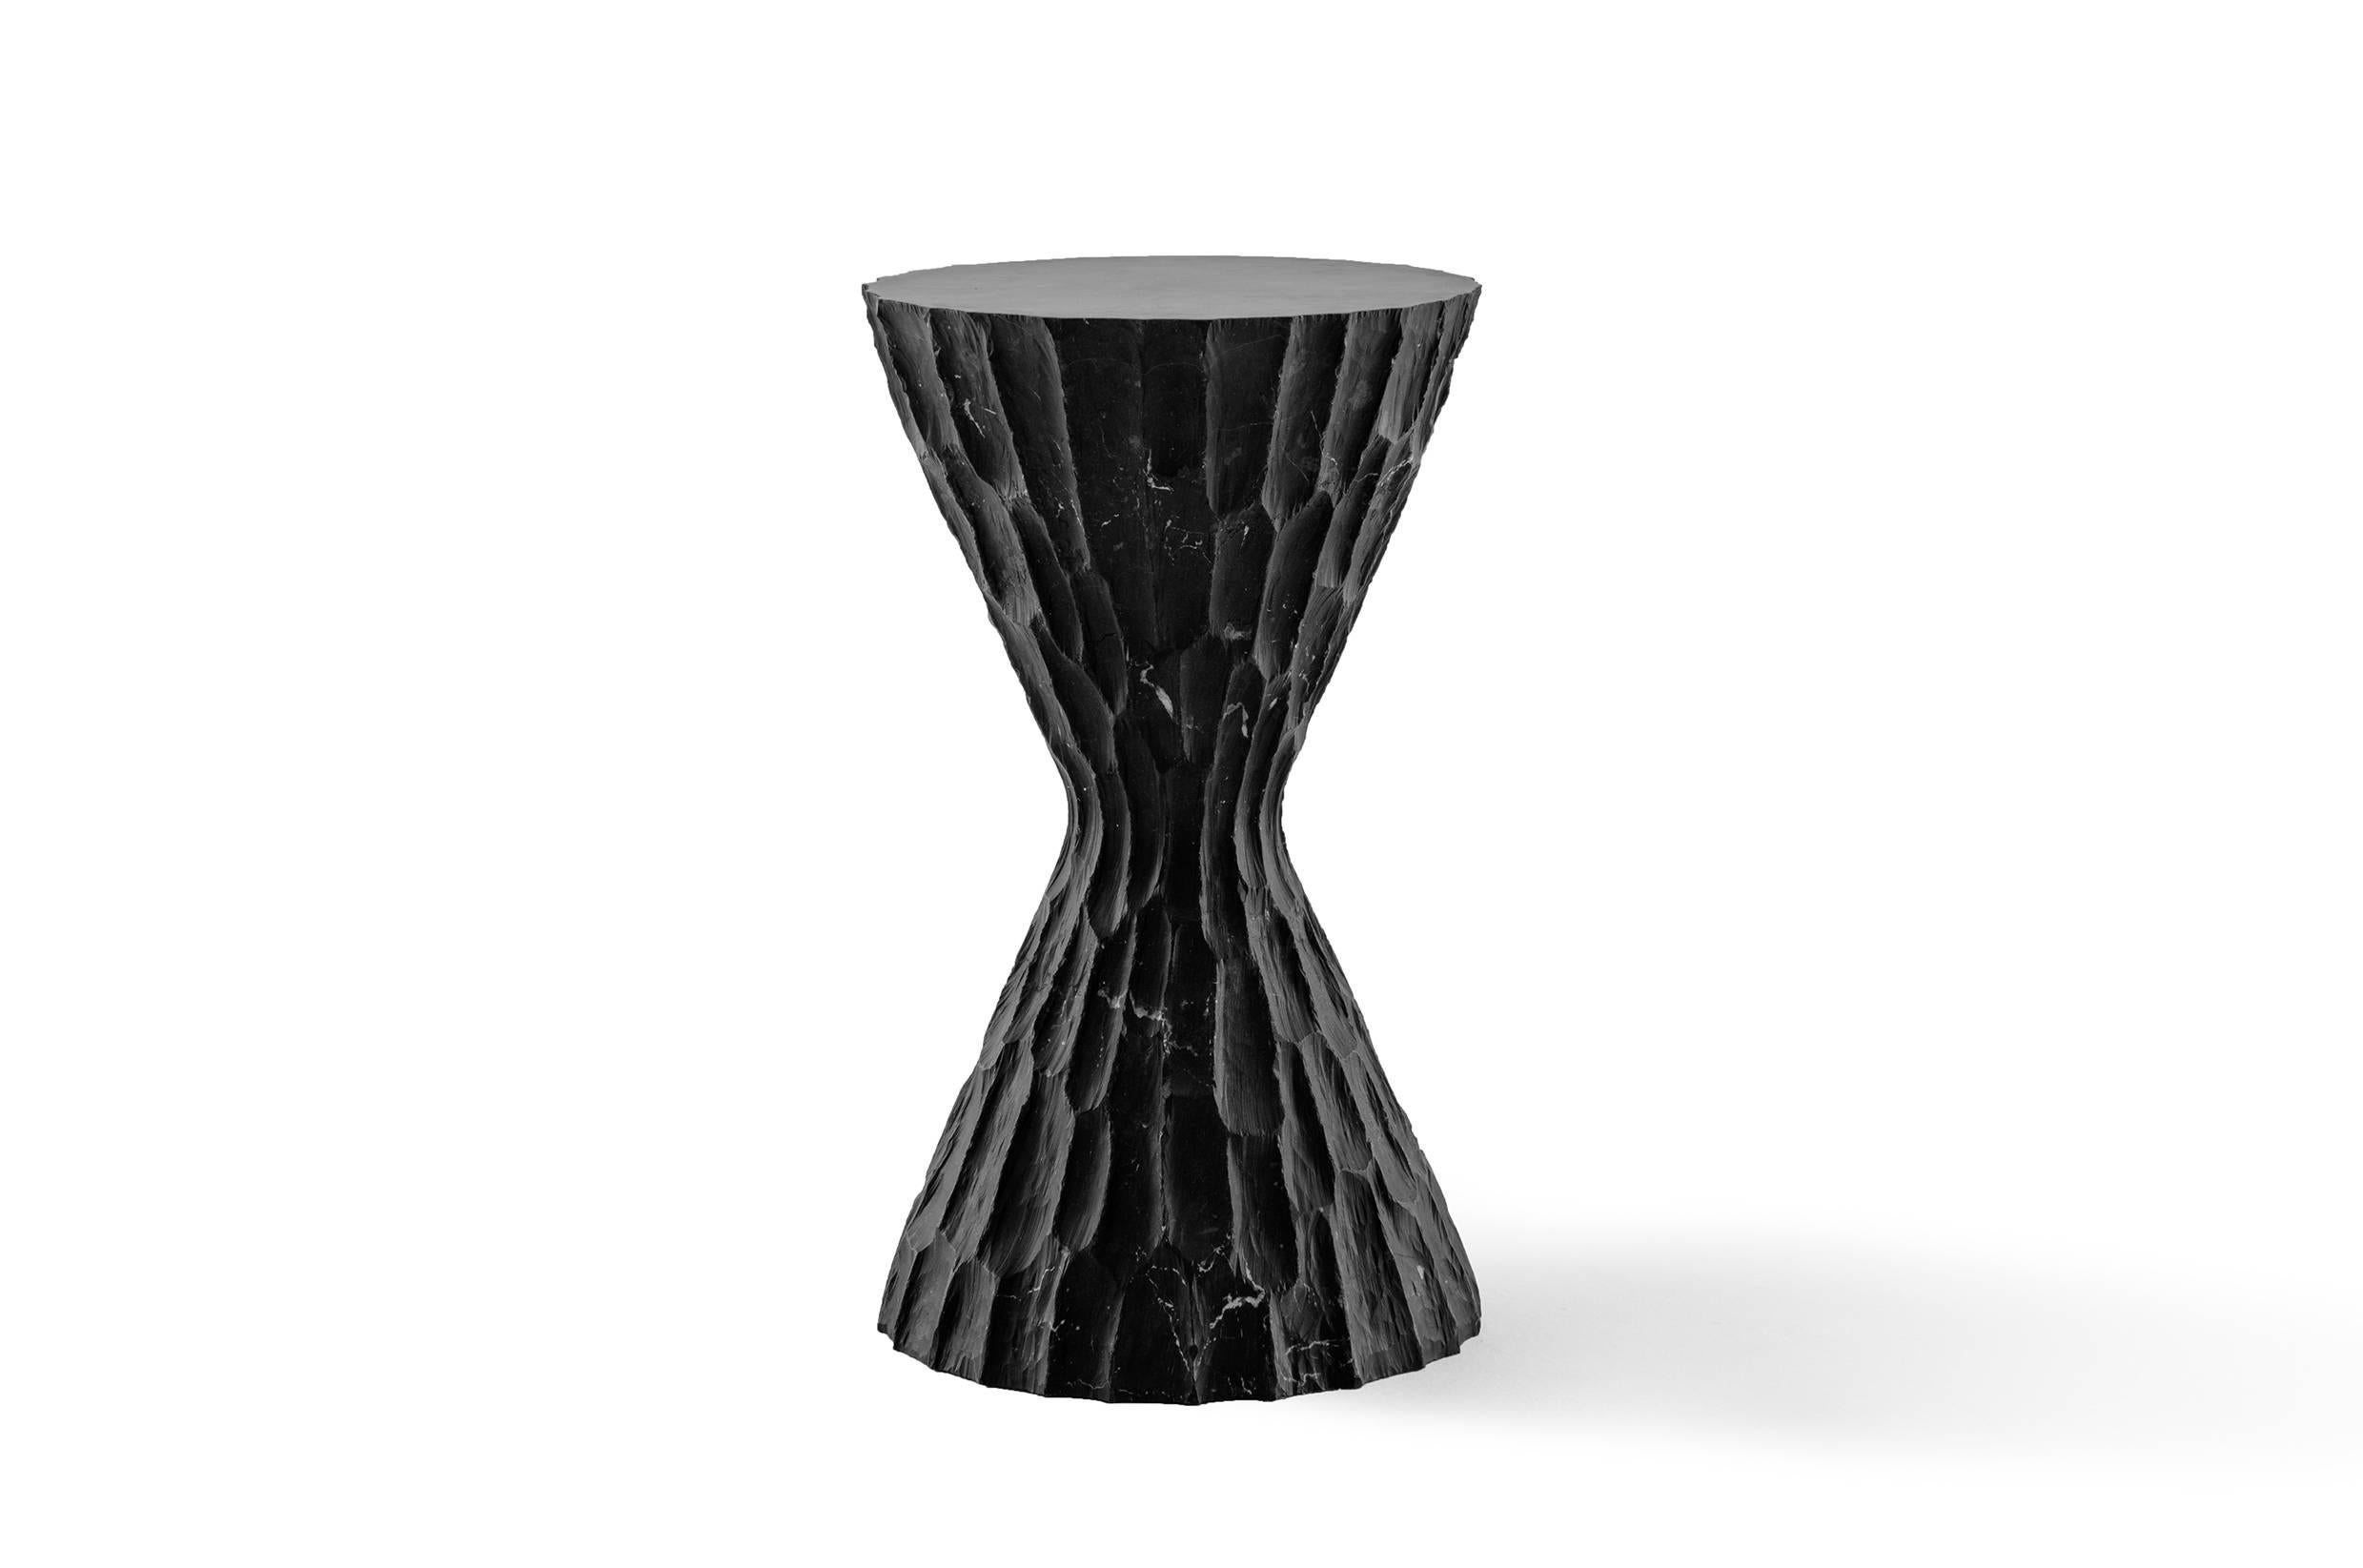 This side table in black marble is part of the Sacred Ritual Objects, collection by EWE Studio. Created out of fascination by the evolving skills of the artisans and their successful execution of exquisite objects, designed to ignite a connection